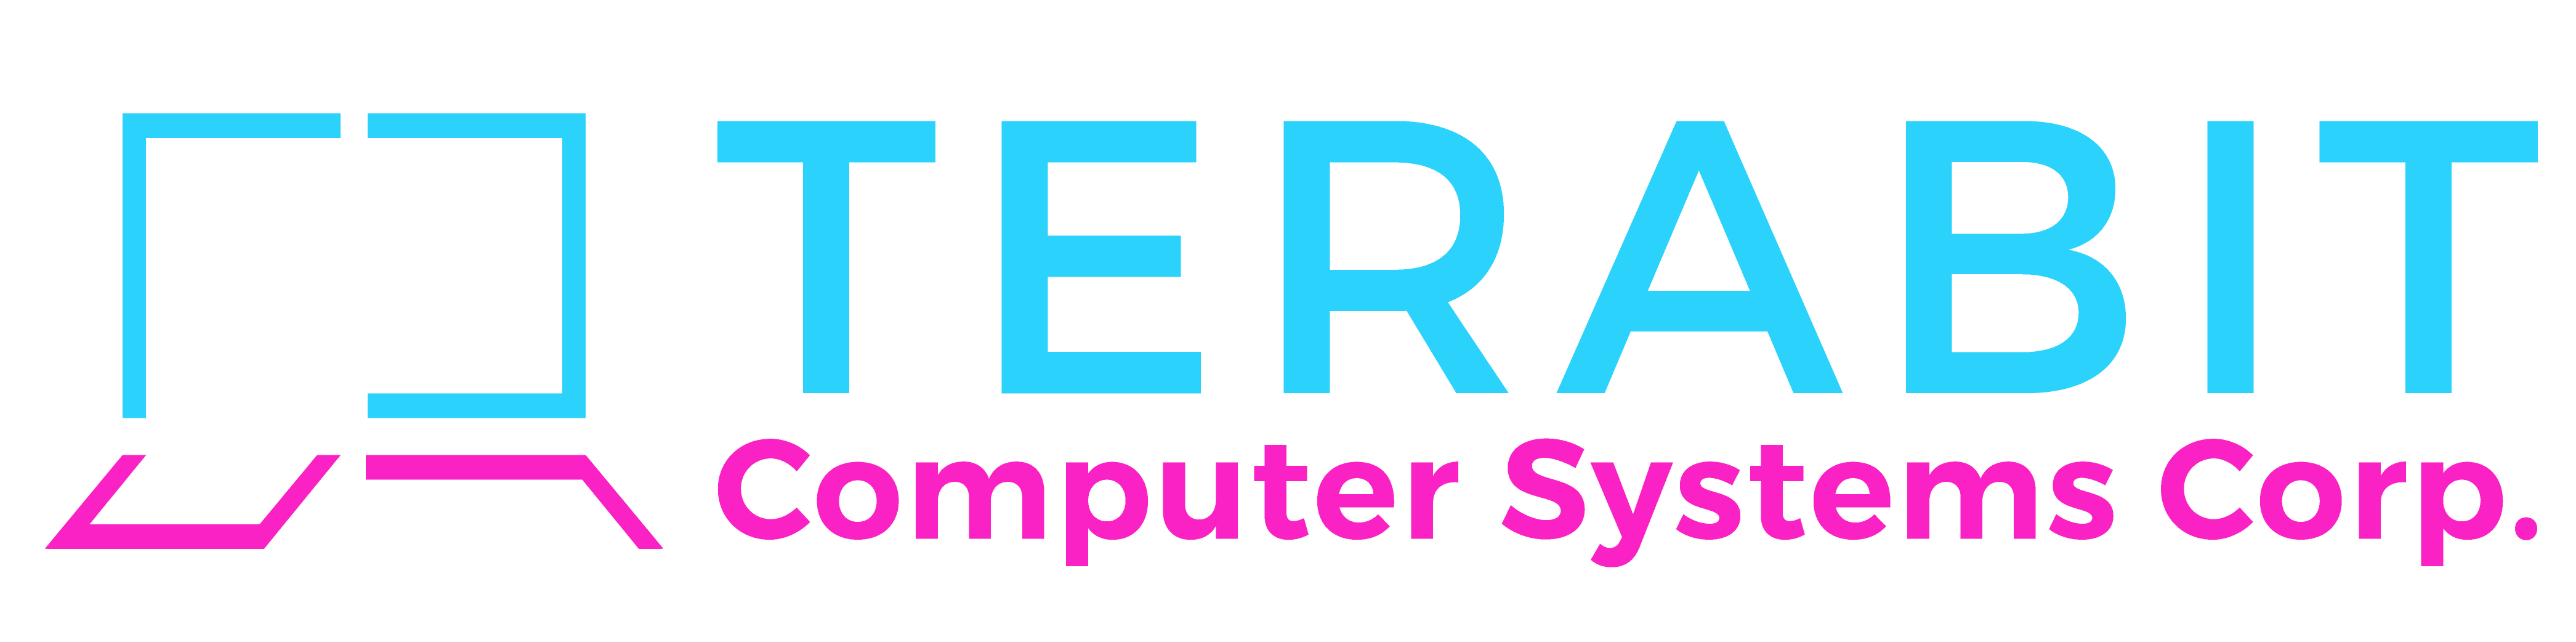 Terabit Computer Systems Corp